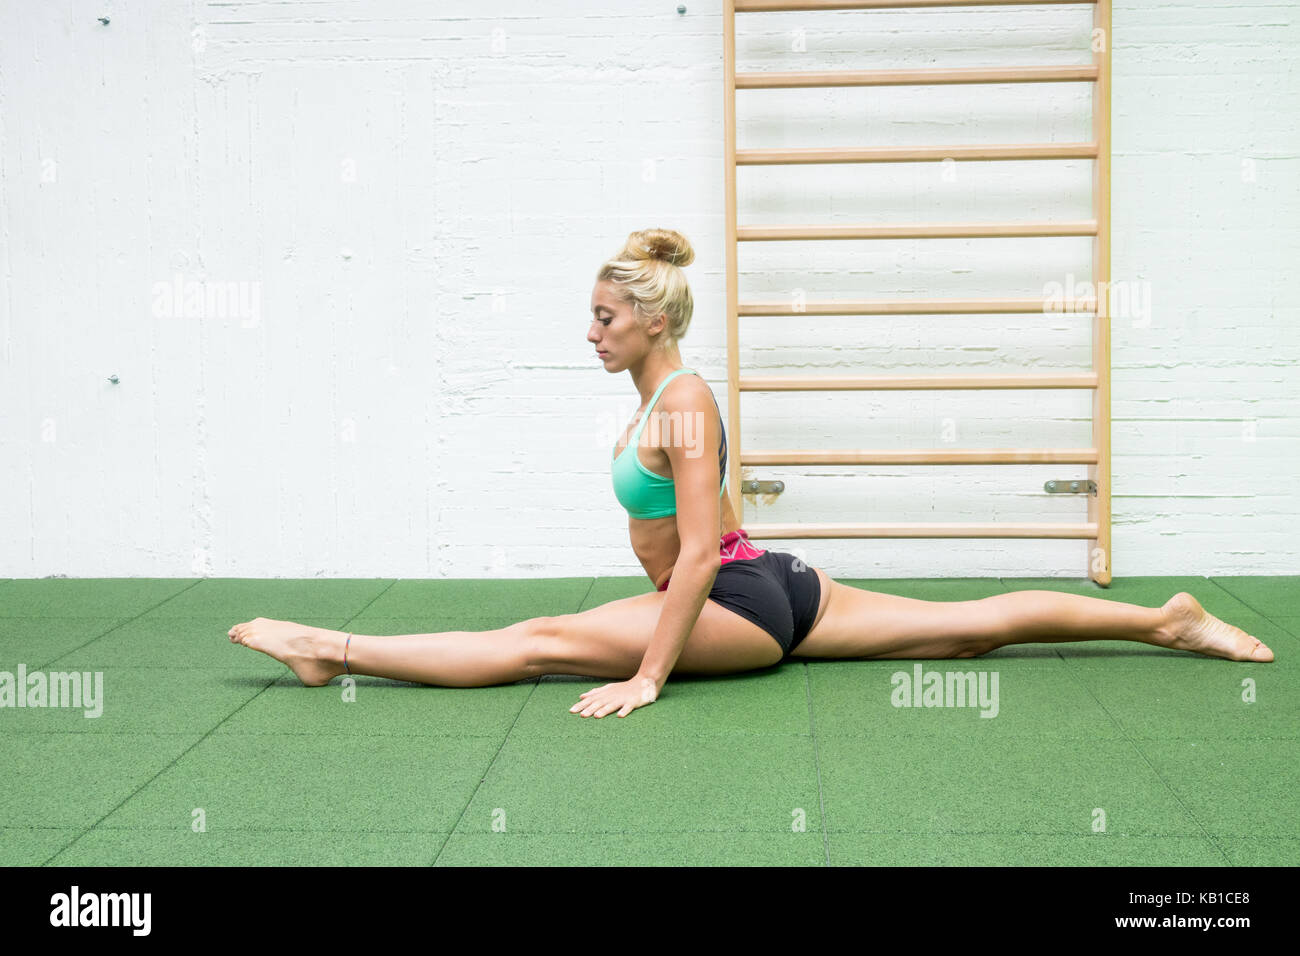 Fitness girl stretching legs doing pilates leg stretches exercises